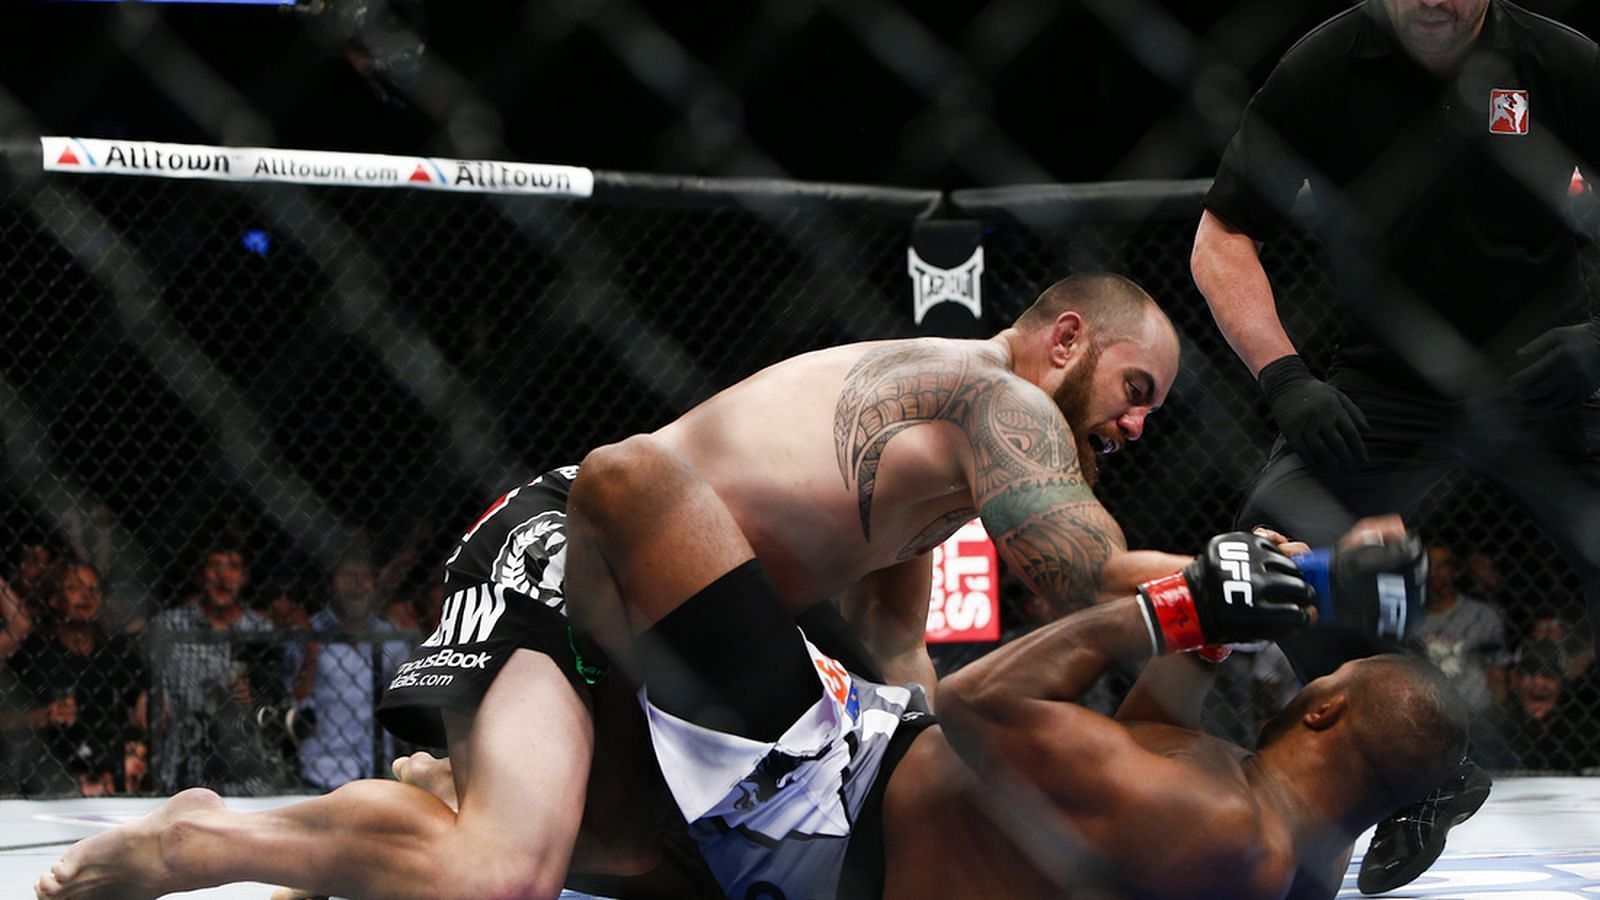 Travis Browne surprised everyone with his dexterity when he used a front kick to knock out Alistair Overeem